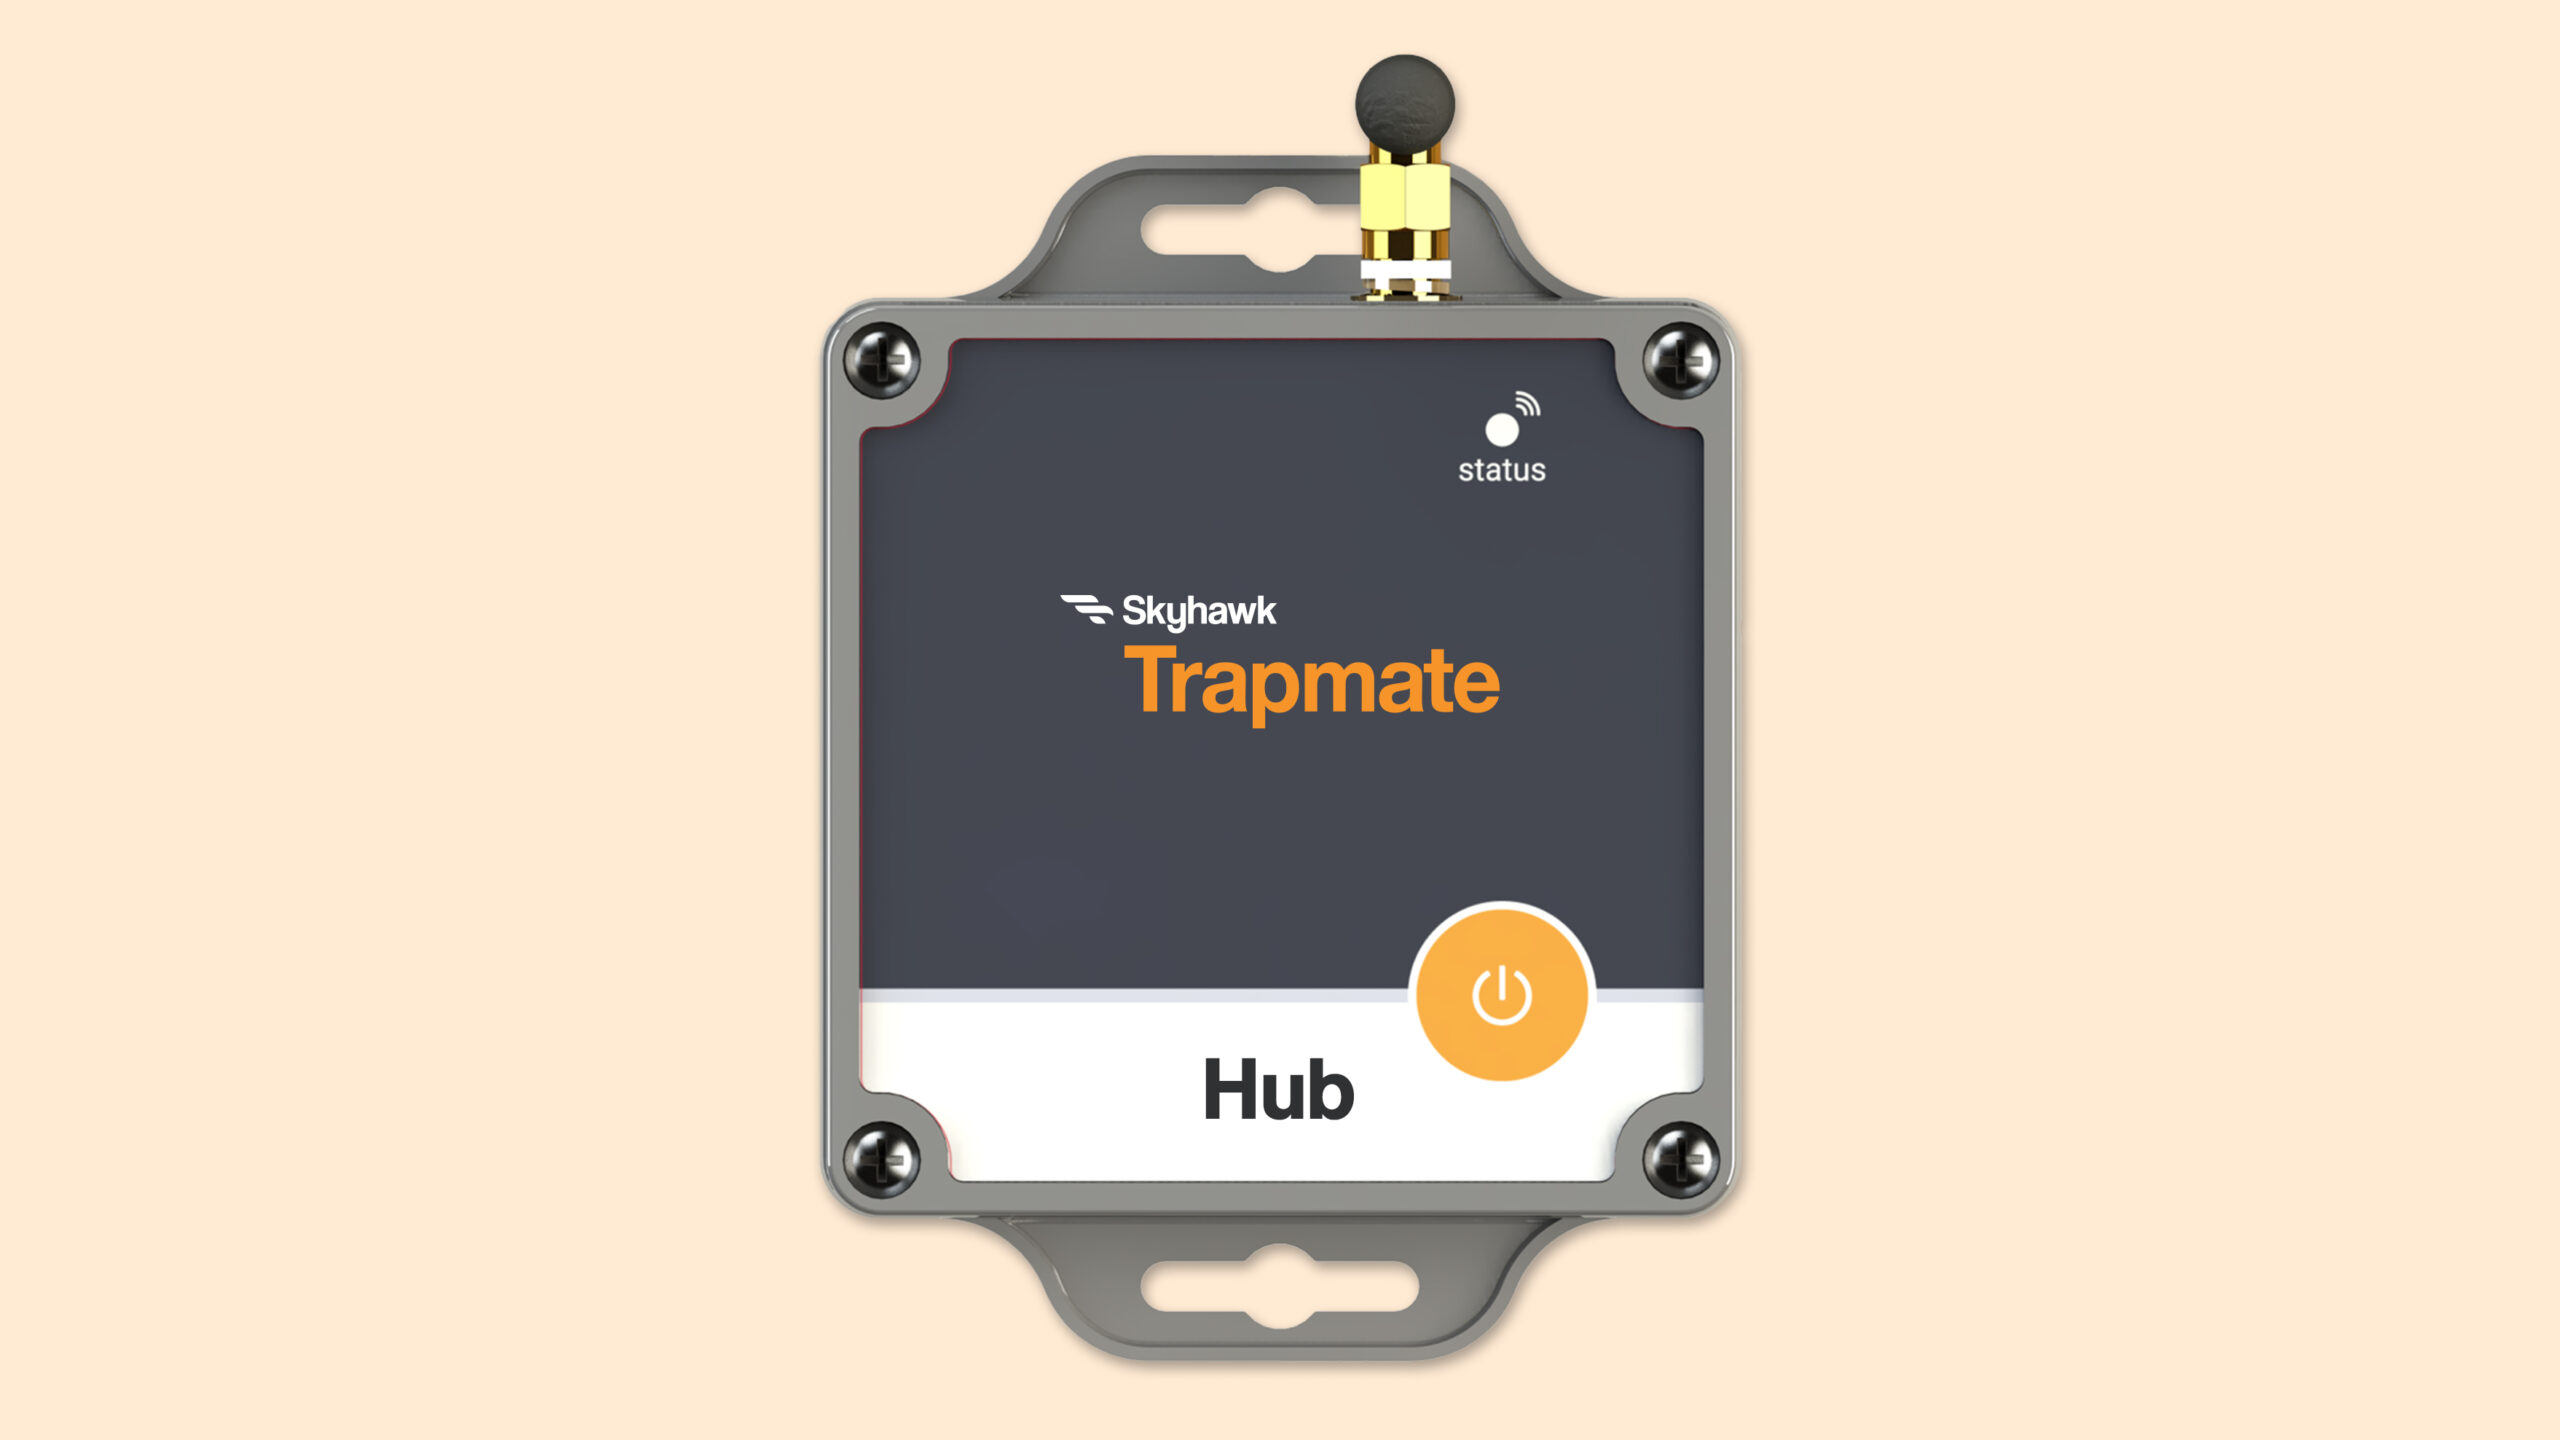 The Trapmate Hub connects to hundreds of sensors as far away as two thousand feet